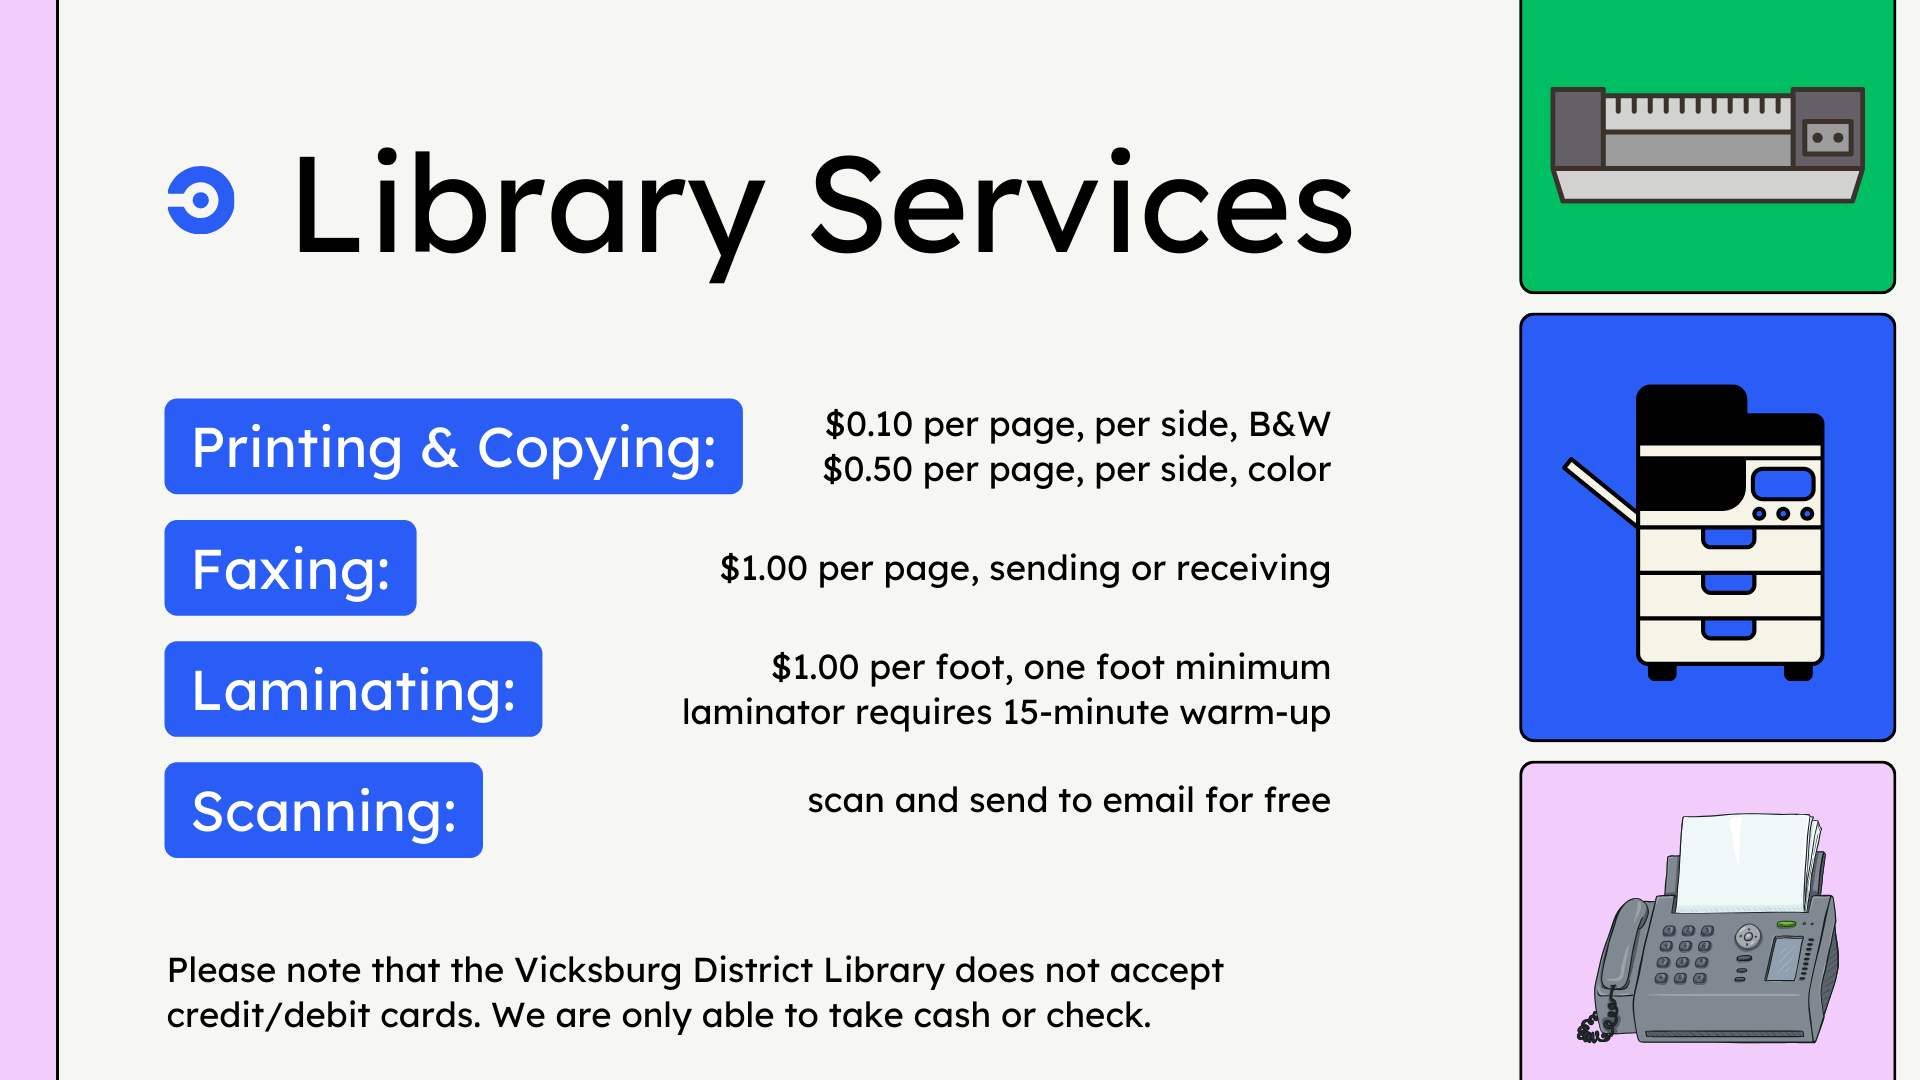 The library provides photocopying and printing, faxing, and laminating for a small fee, and scanning to email for free.